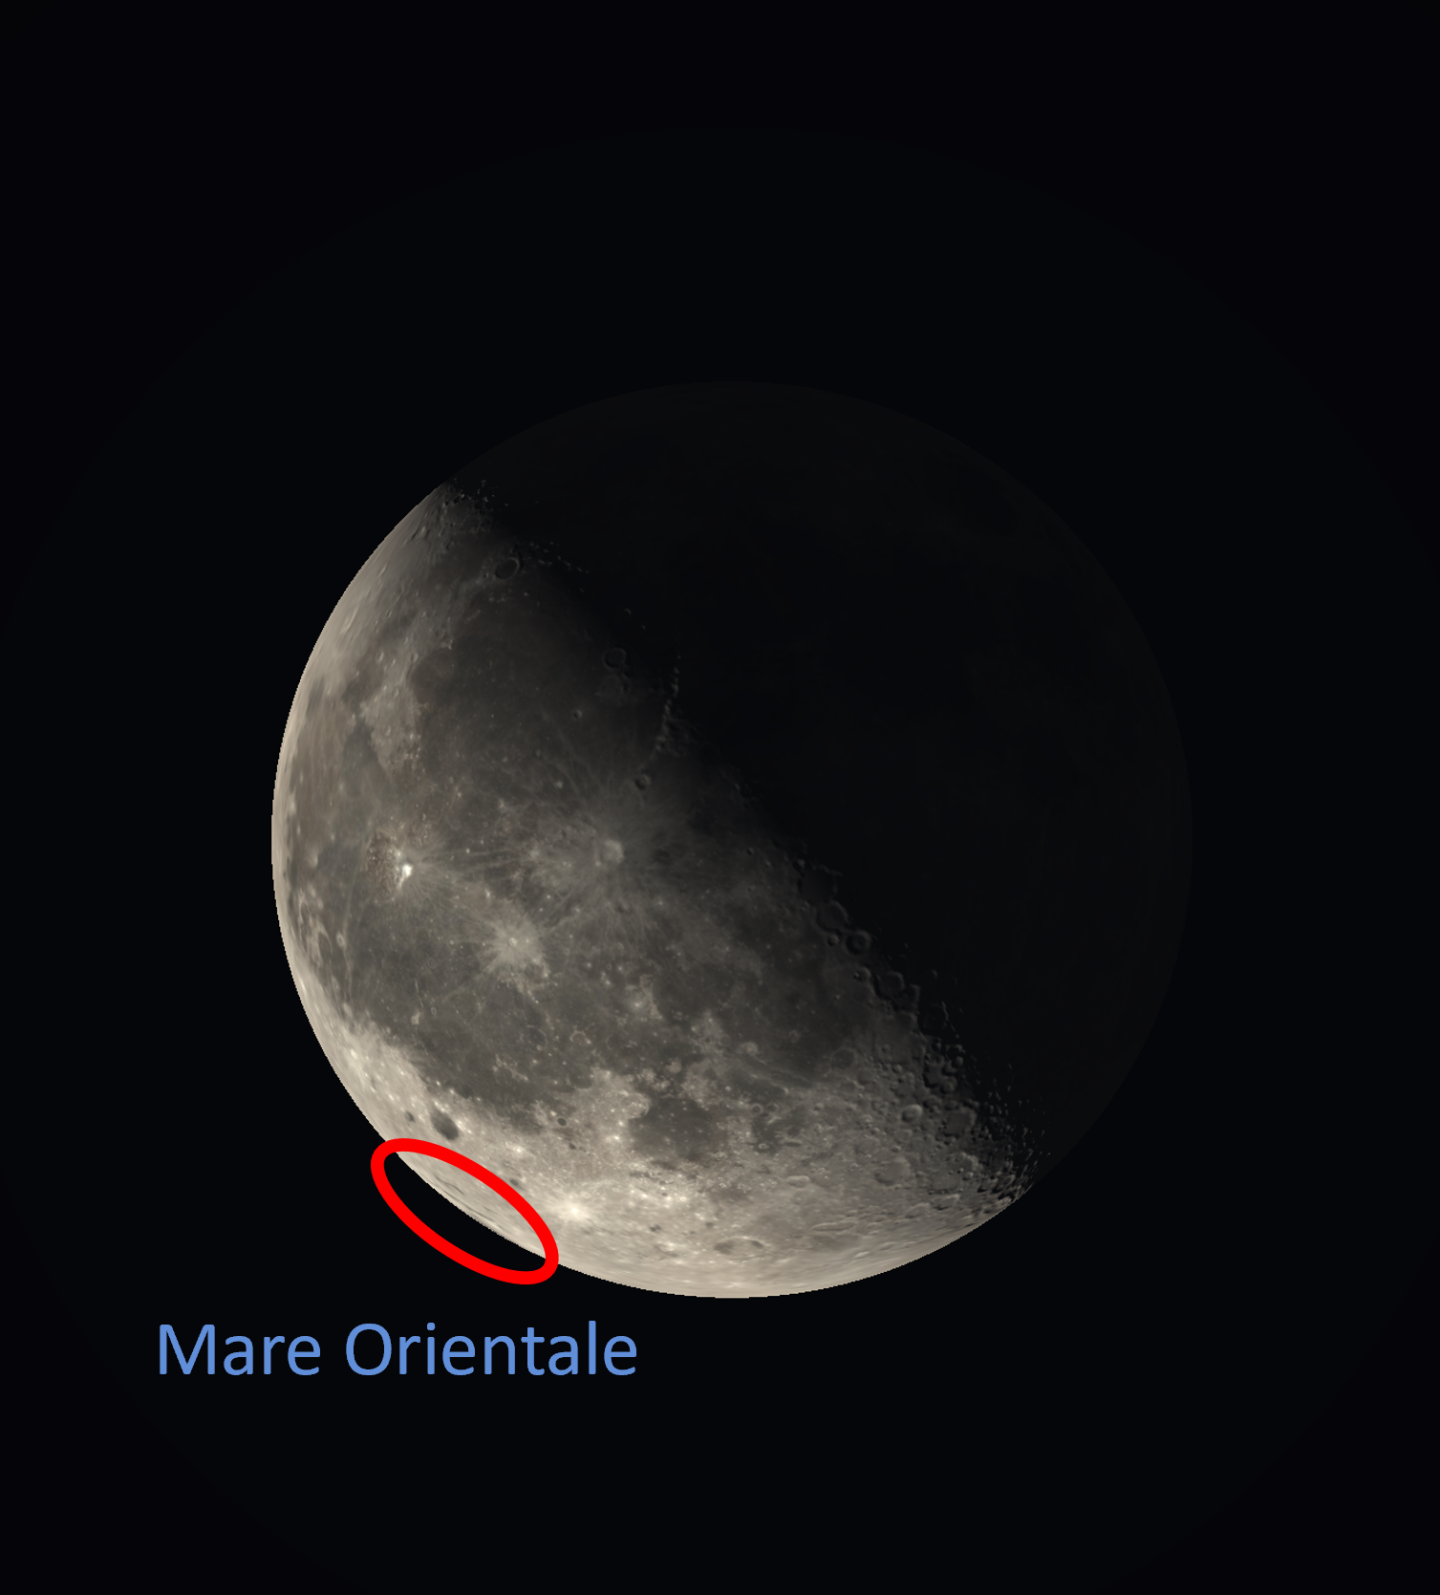 Mare Orientale is circled on the south west limb of the Moon.